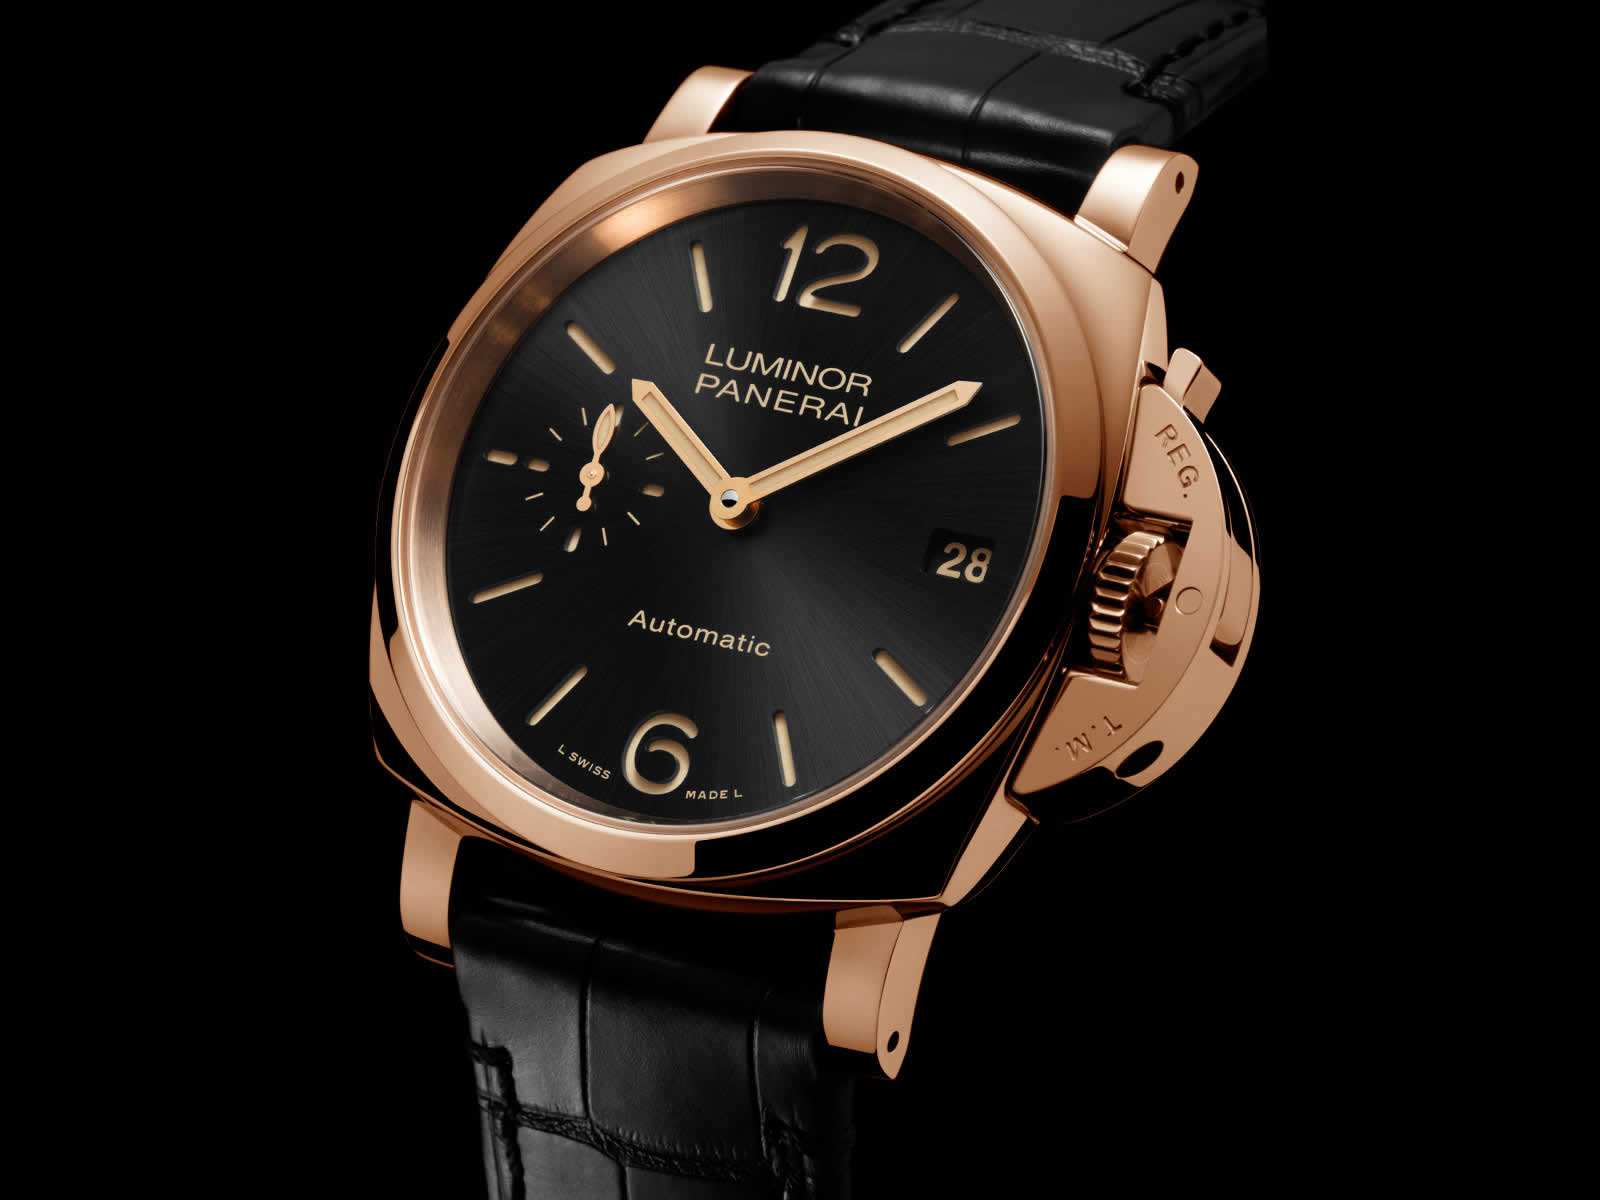 The 38 mm copy Panerai Luminor Due PAM00908 watches have black dials.